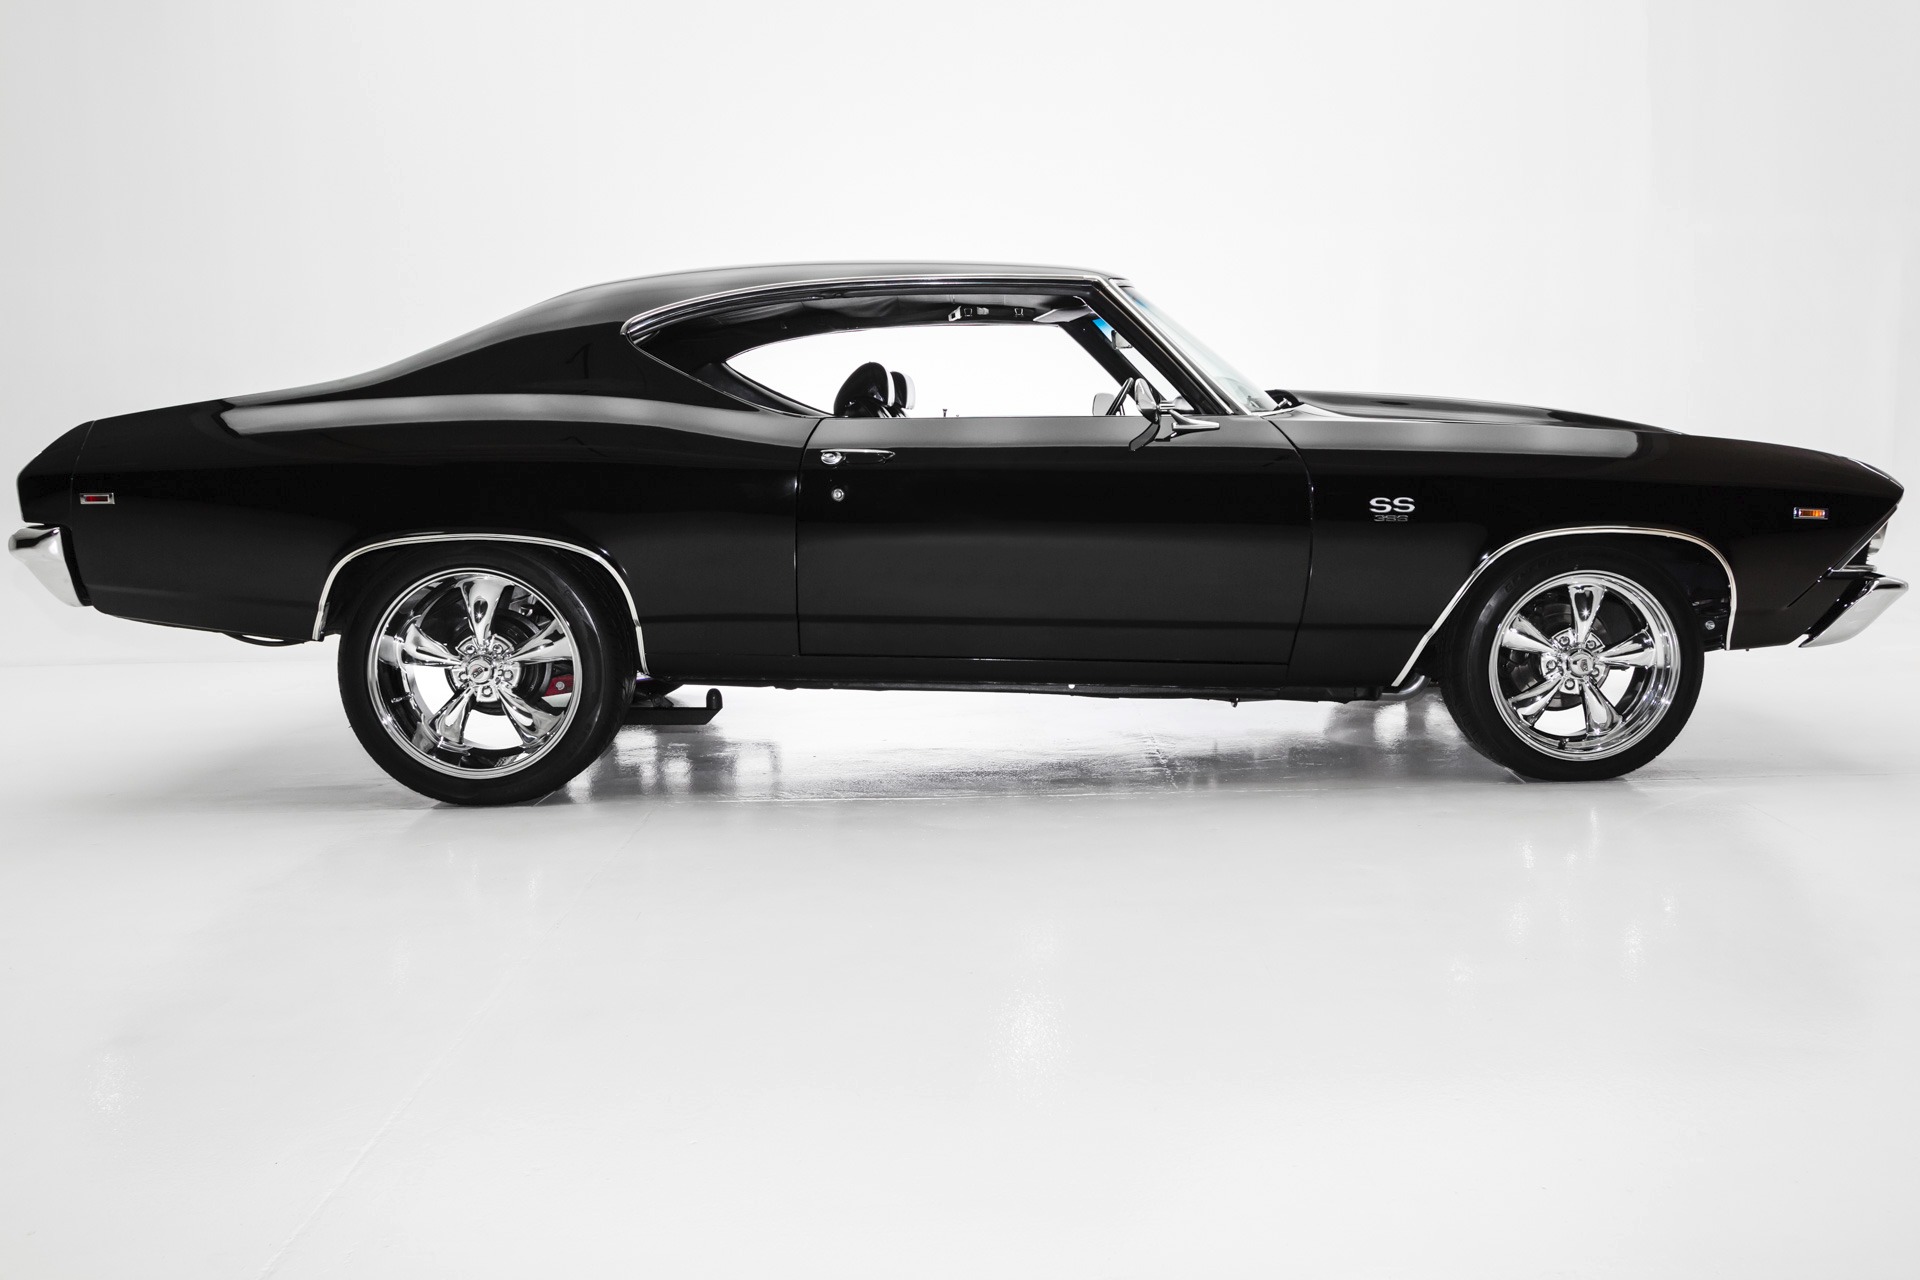 For Sale Used 1969 Chevrolet Chevelle Black Beast! 496/450hp | American Dream Machines Des Moines IA 50309